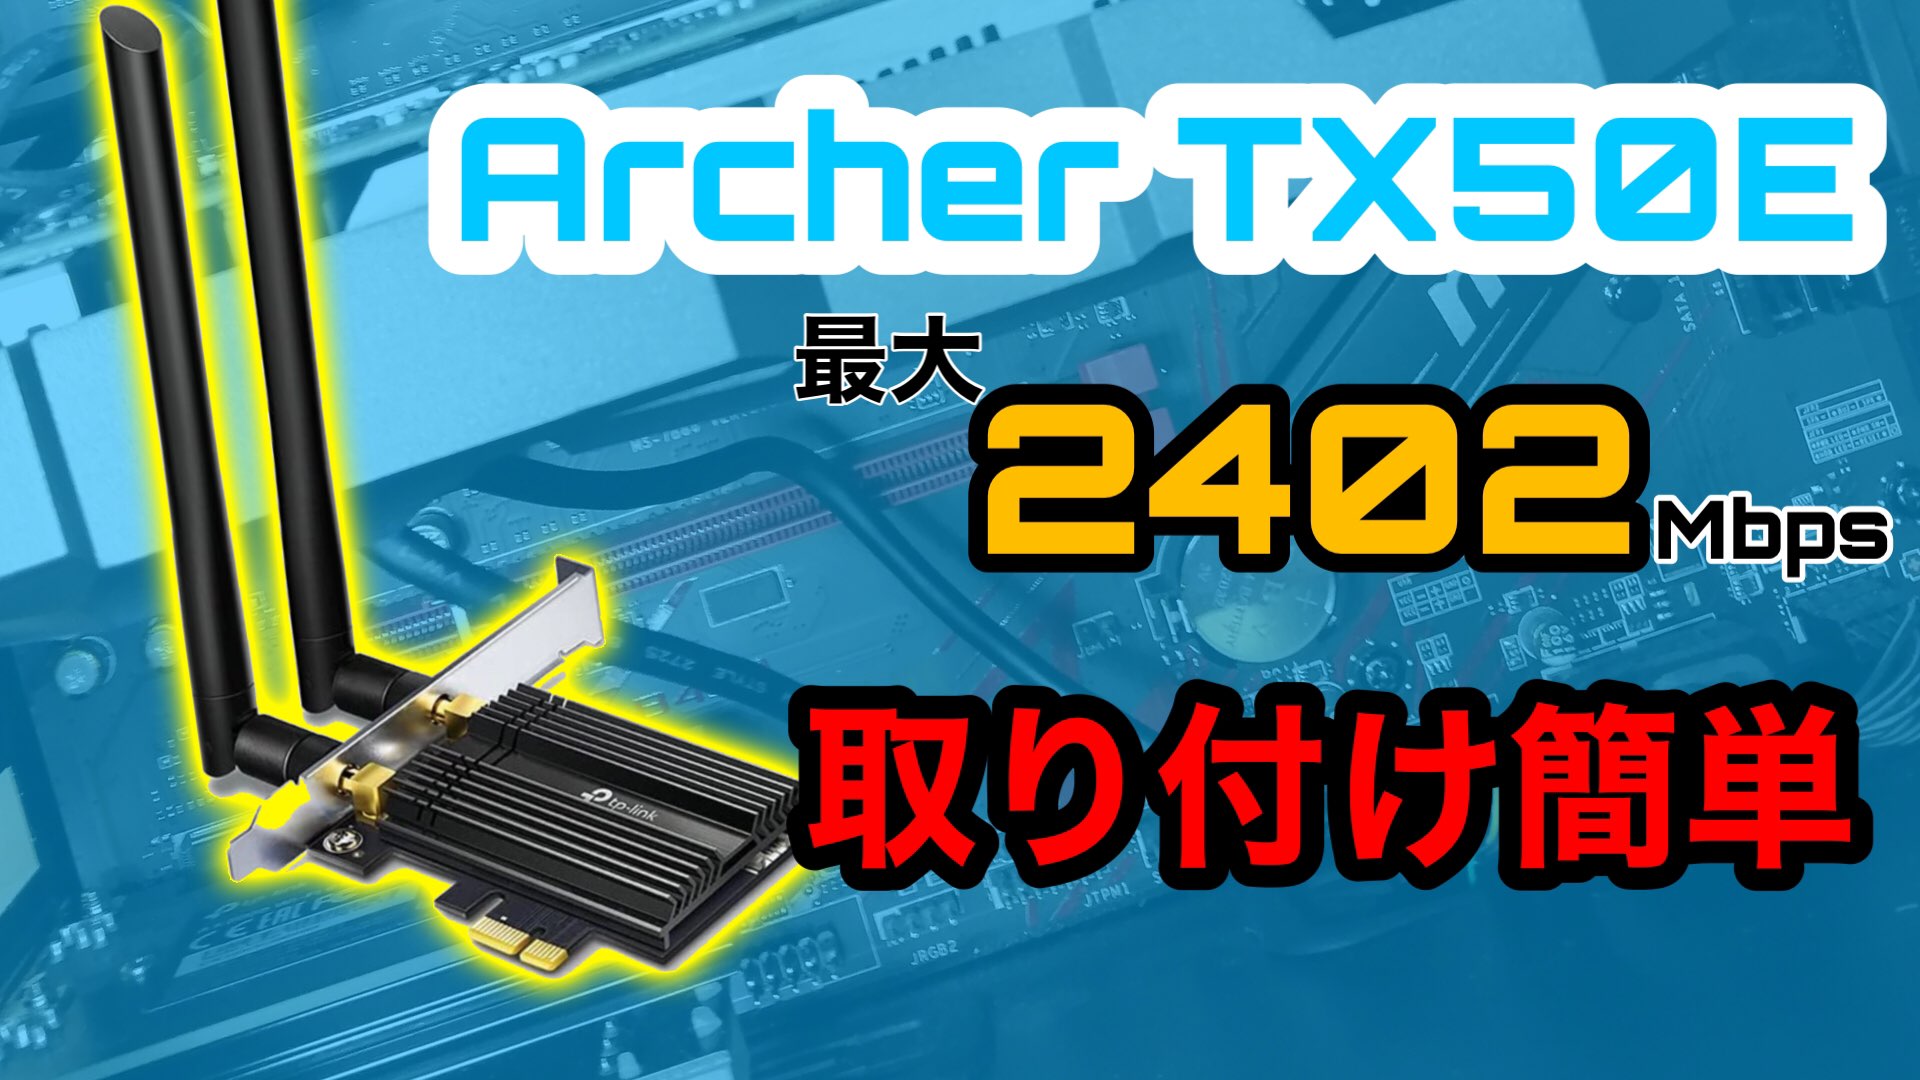 Archer TX50E レビュー】初心者でも簡単取り付け！Wi-Fi6・Bluetooth5.2対応のPCIe拡張カード